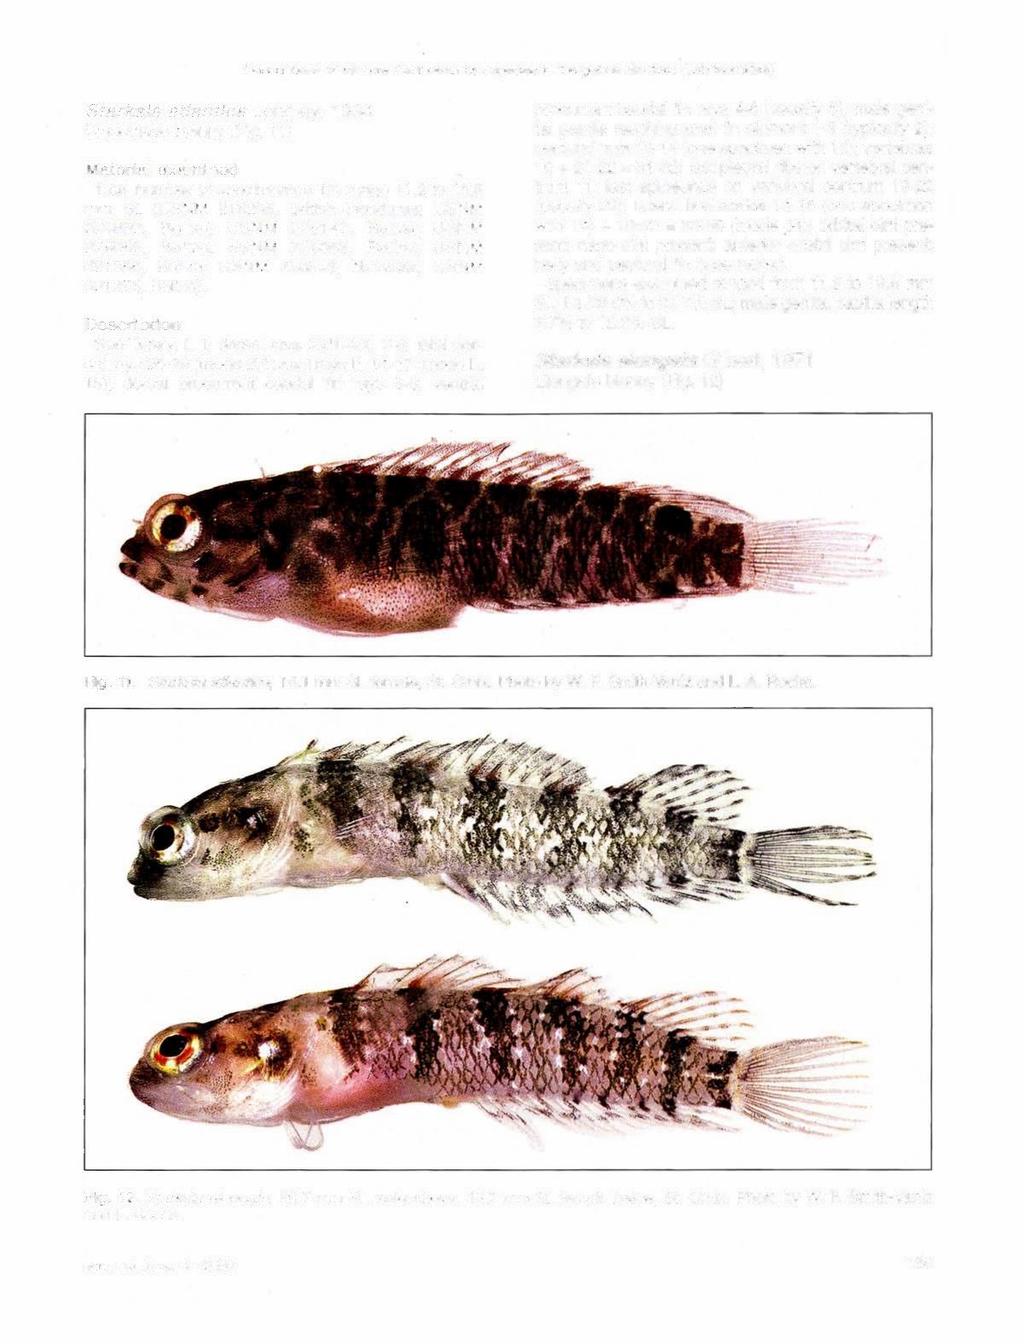 s of six new Caribbean fish species in the genus Starksia (Labrisomidae) Starksia atlantica Longley, 1934 Smootheye blenny (Fig. 11) Material examined Total number of specimens = 12, range 11.2 to 19.